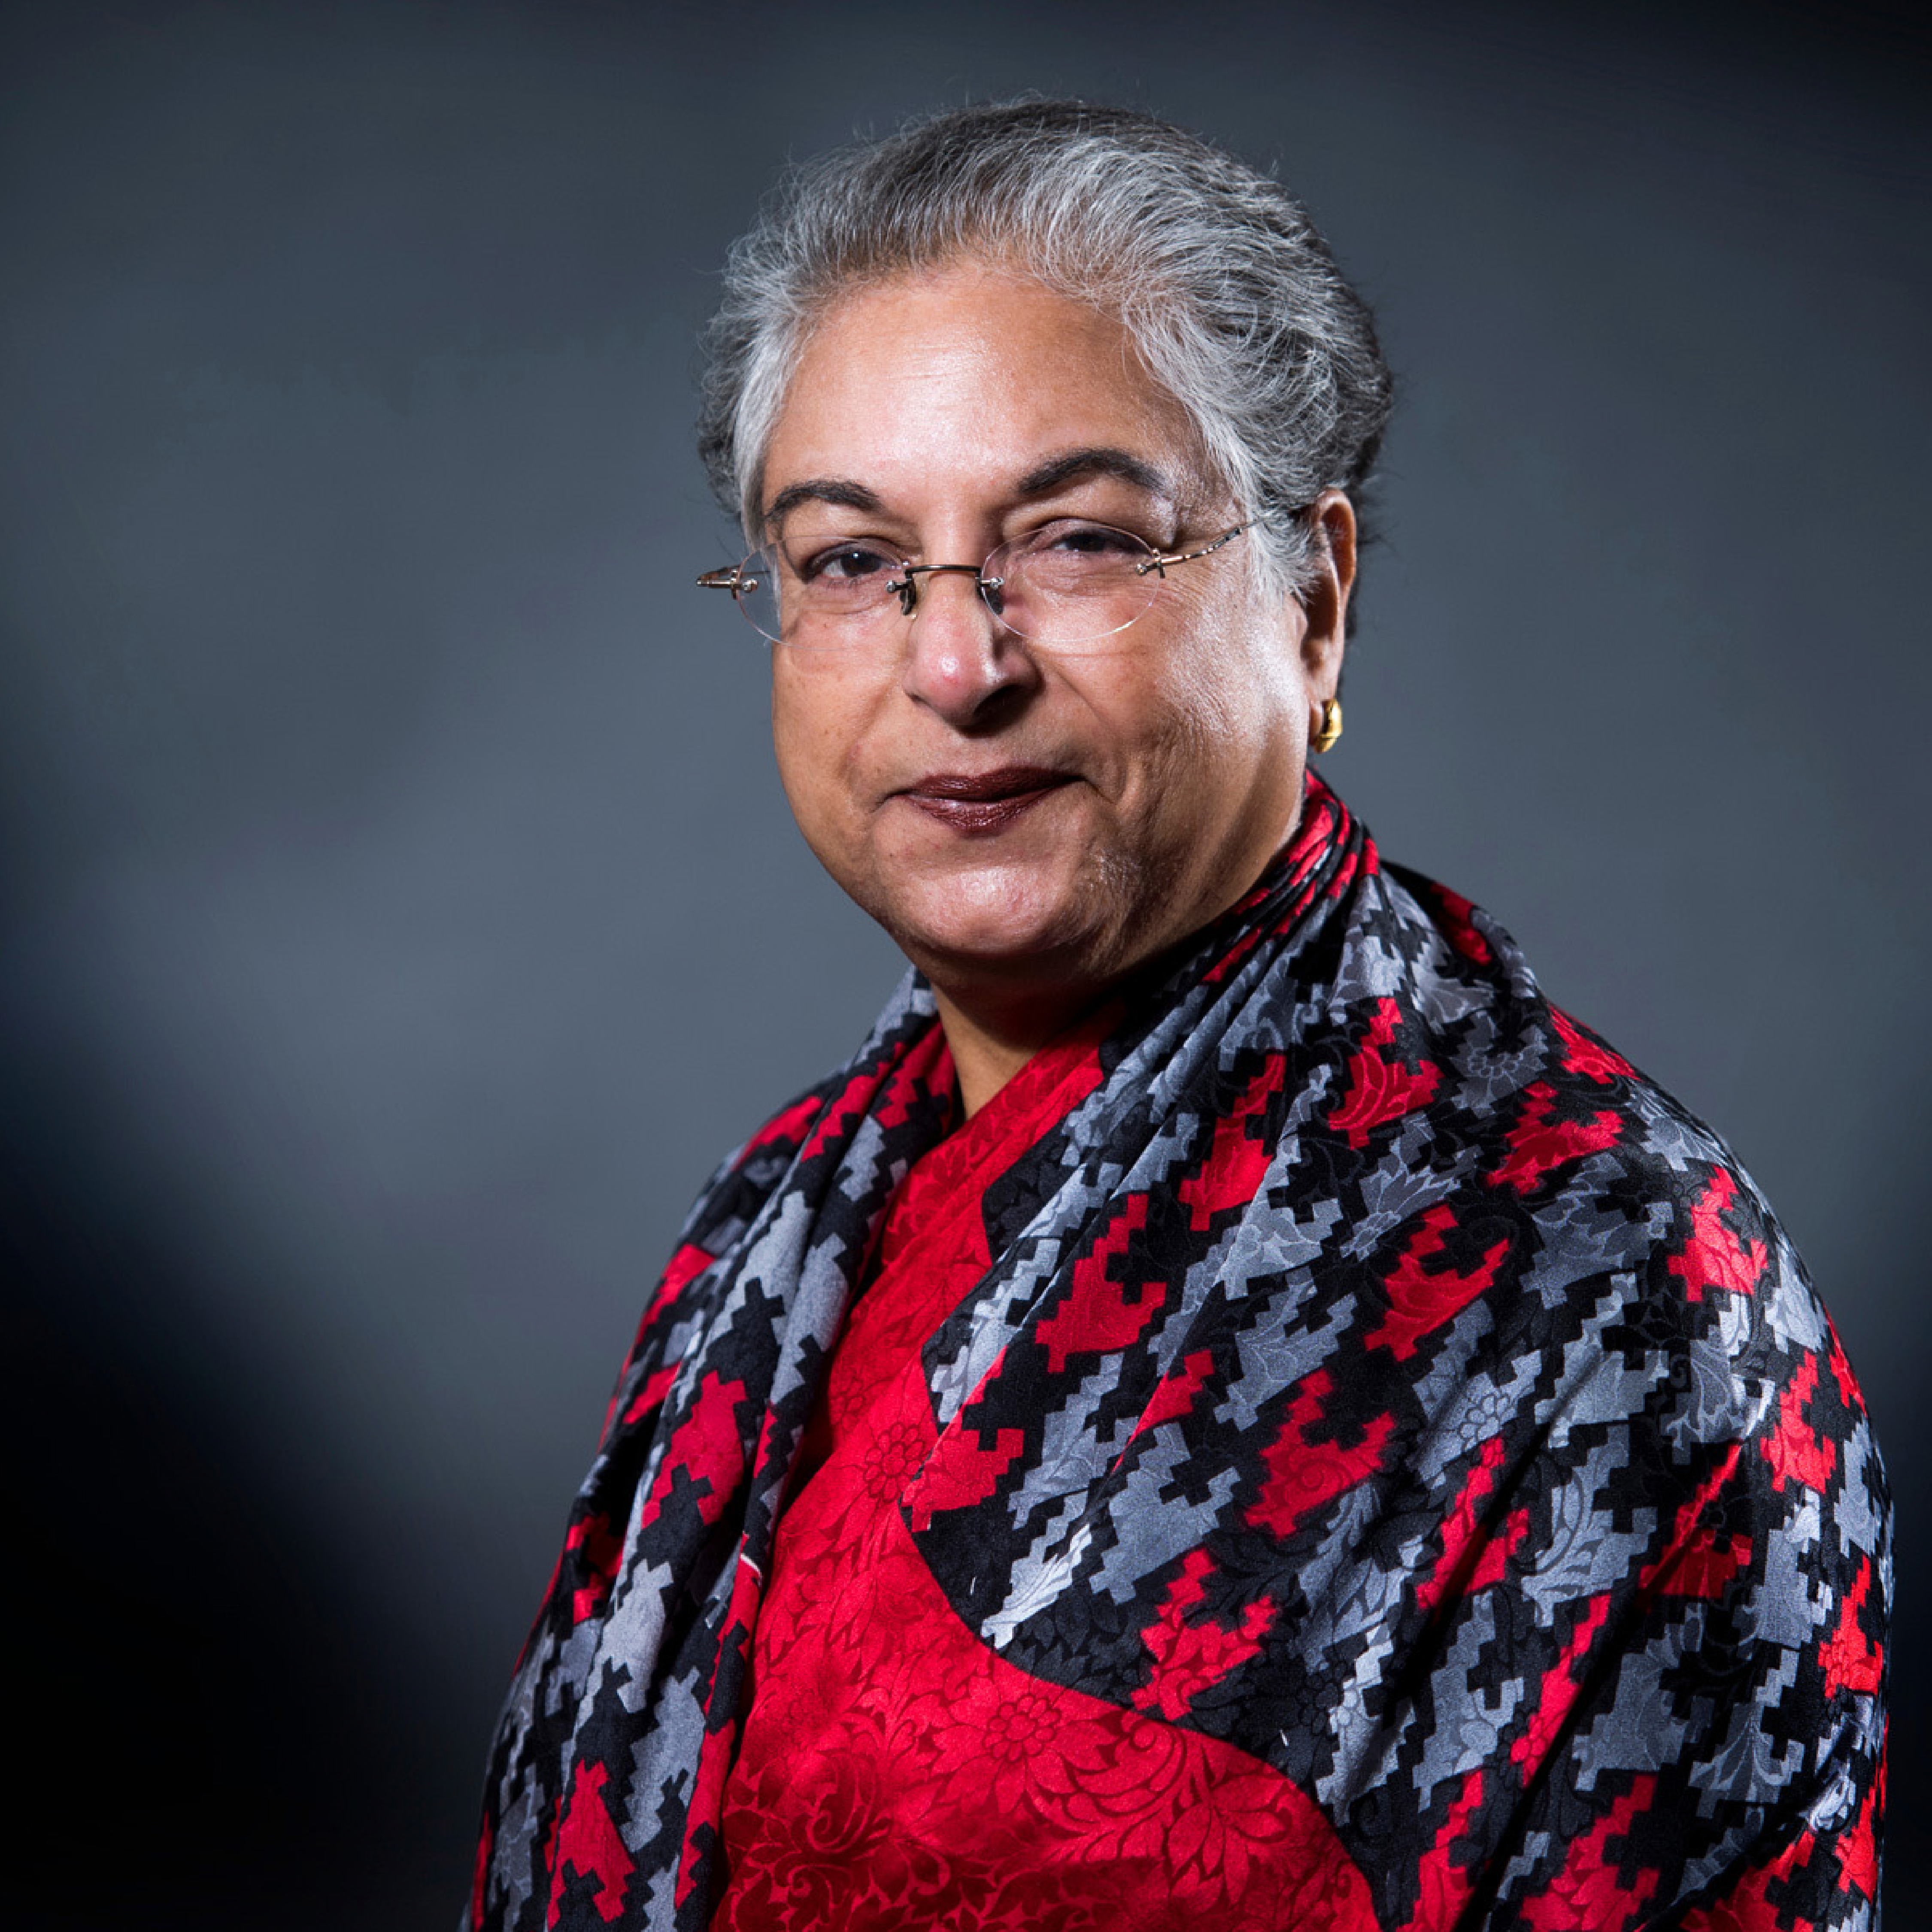 Strengthening the Rule of Law to Advance Gender Equality: Q&A with Hina Jilani